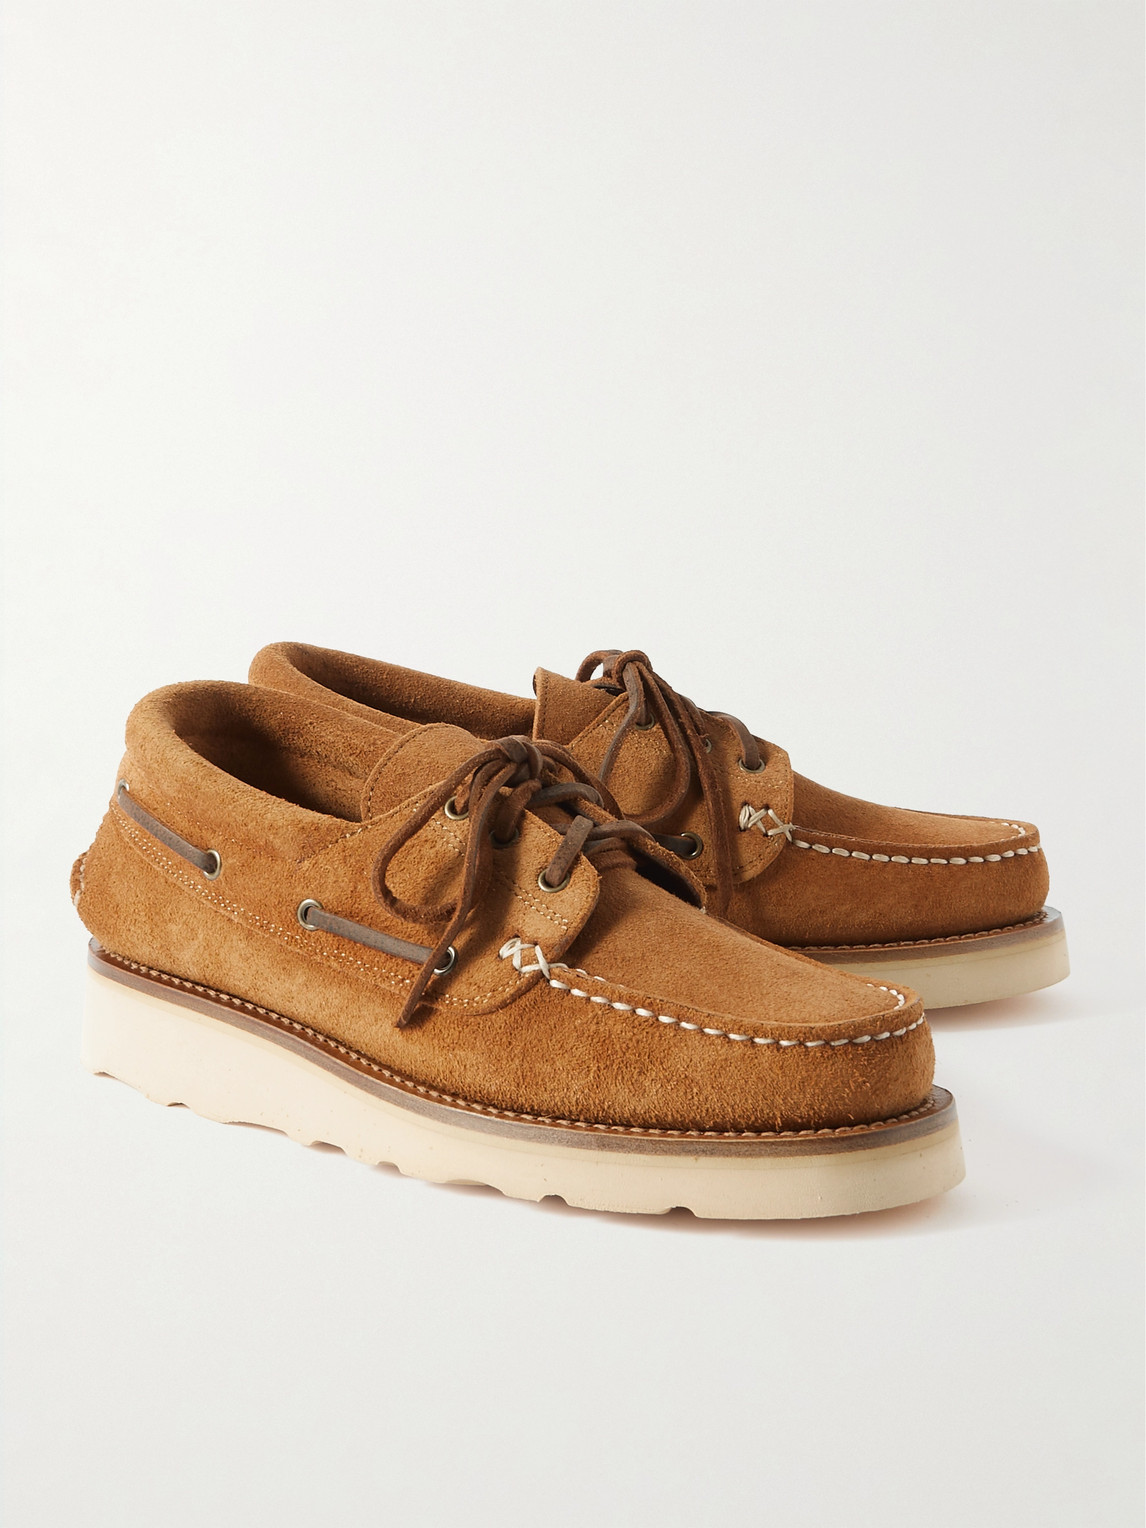 Shop Yuketen Land Barca Tosca Leather Boat Shoes In Brown